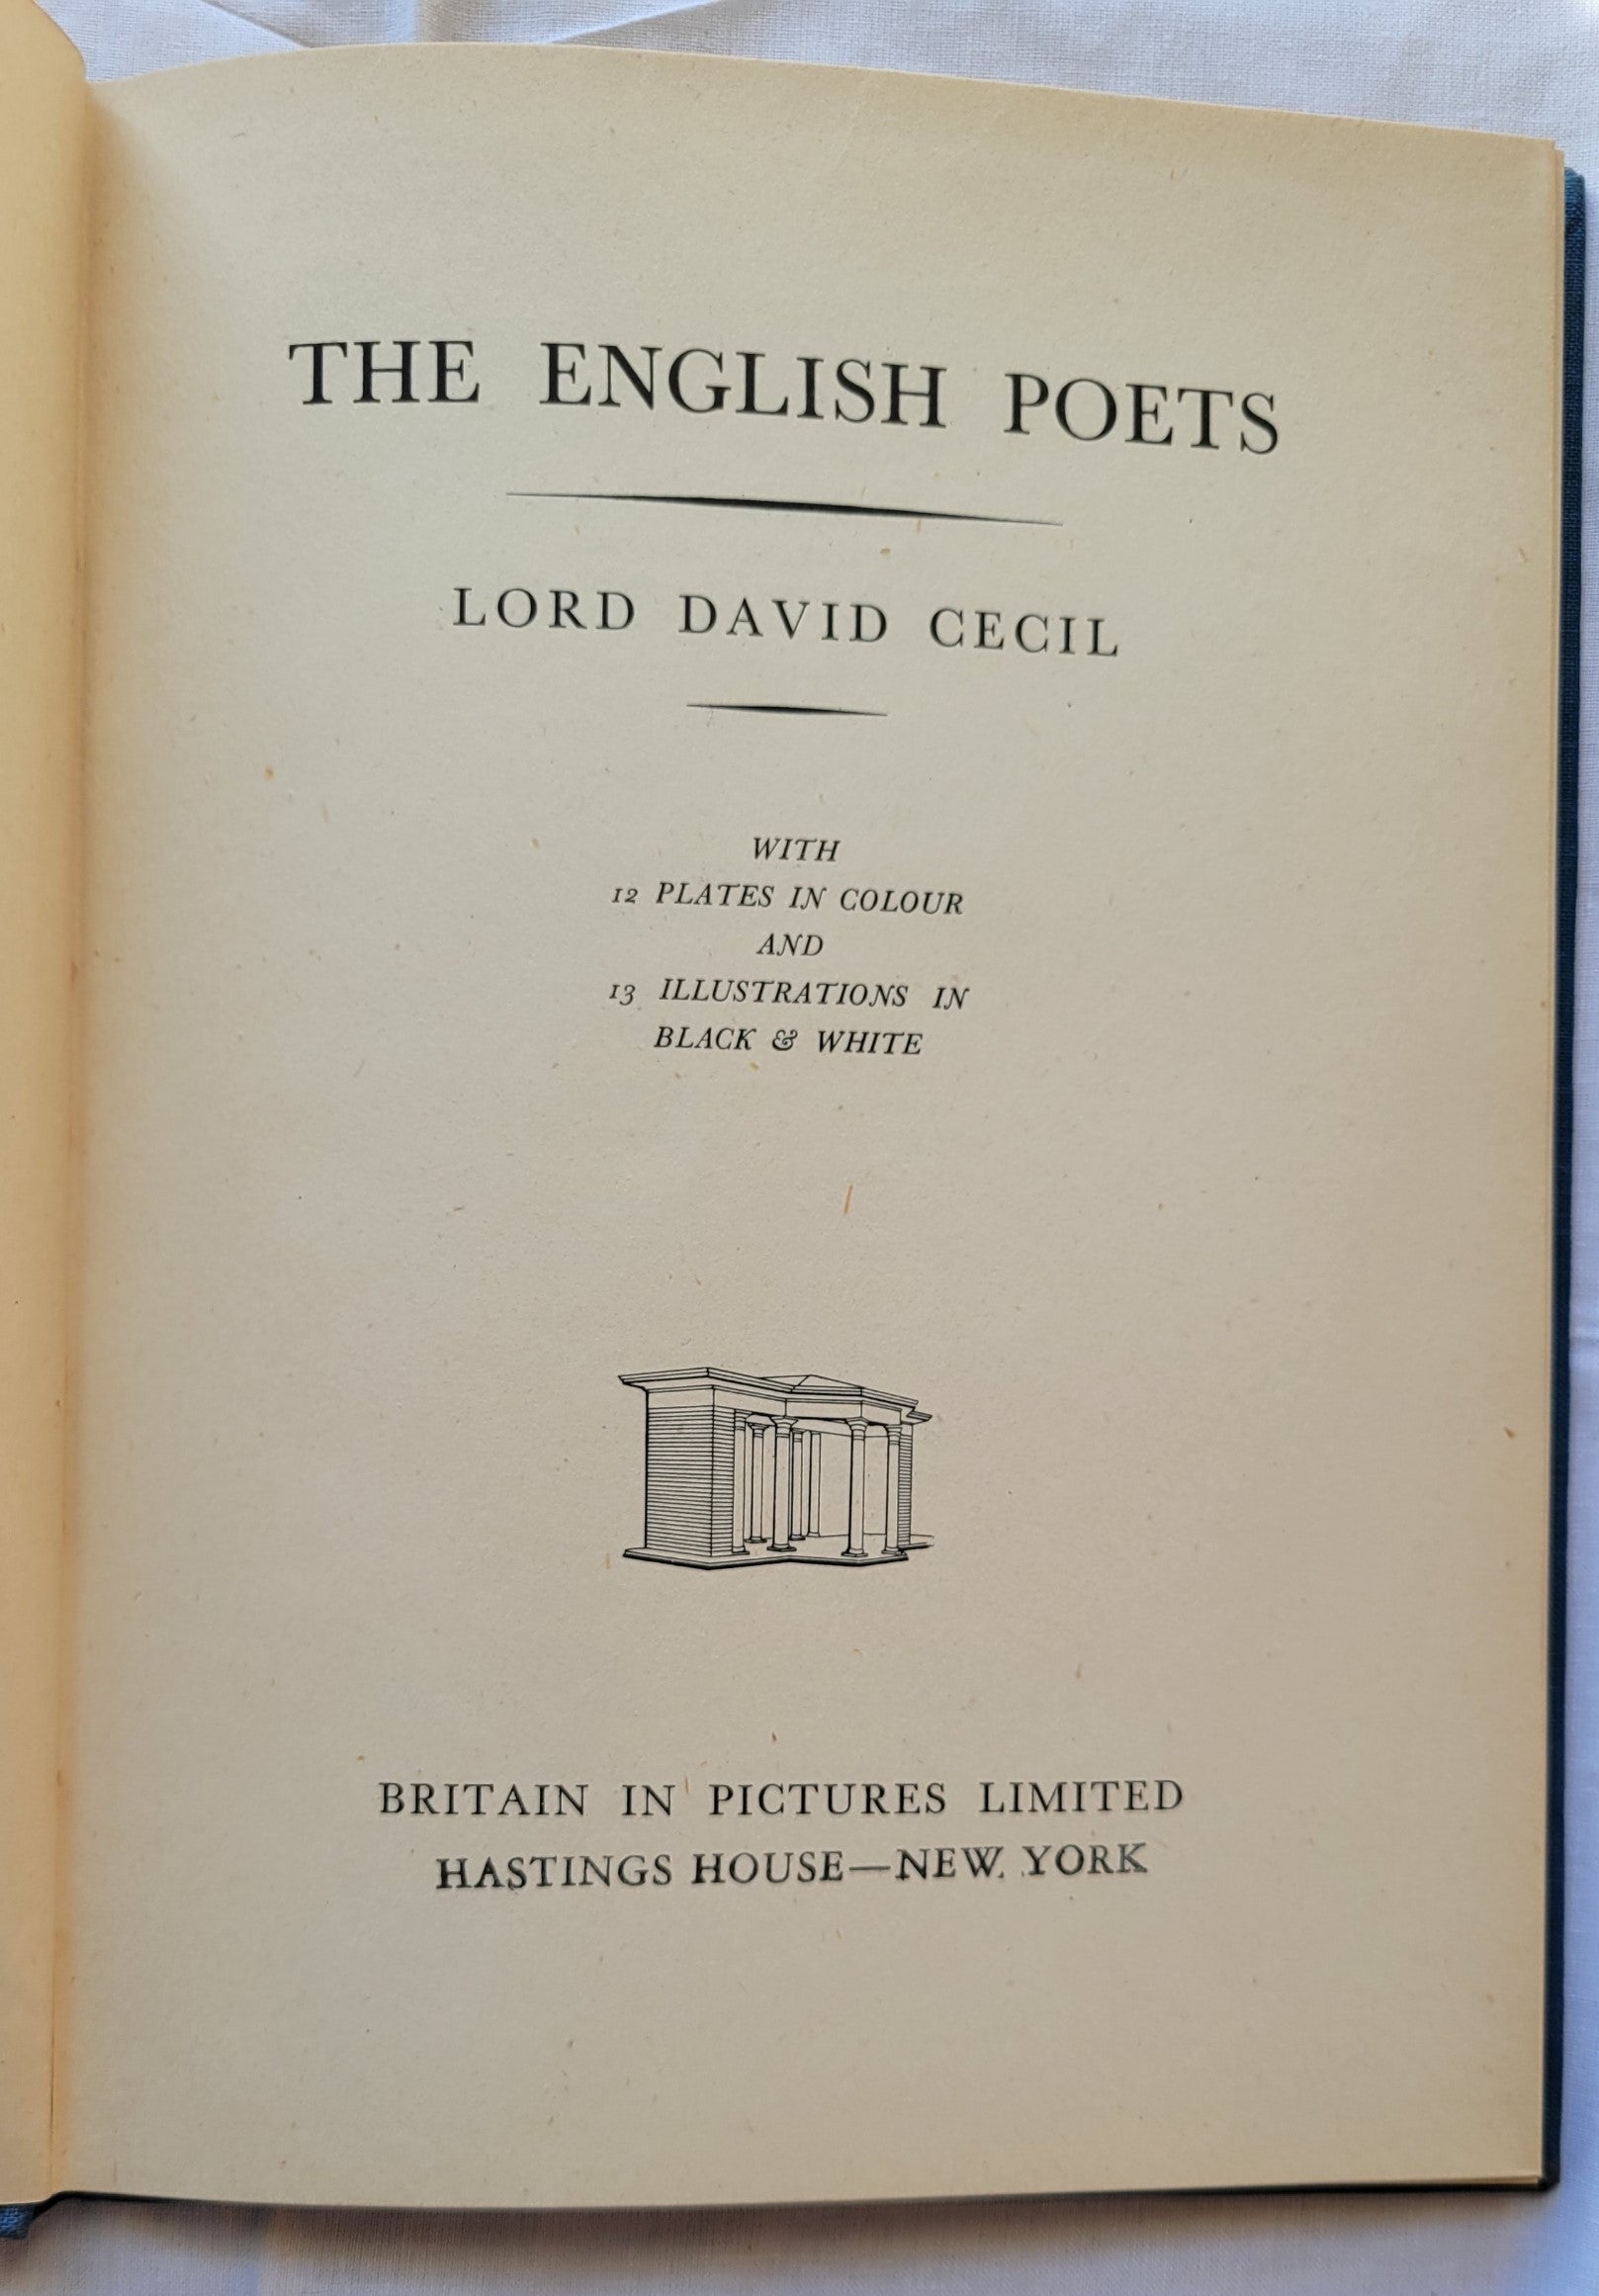 Vintage book for sale "The English Poets" by Lord David Cecil, published by Hastings House, 1940. Title page.